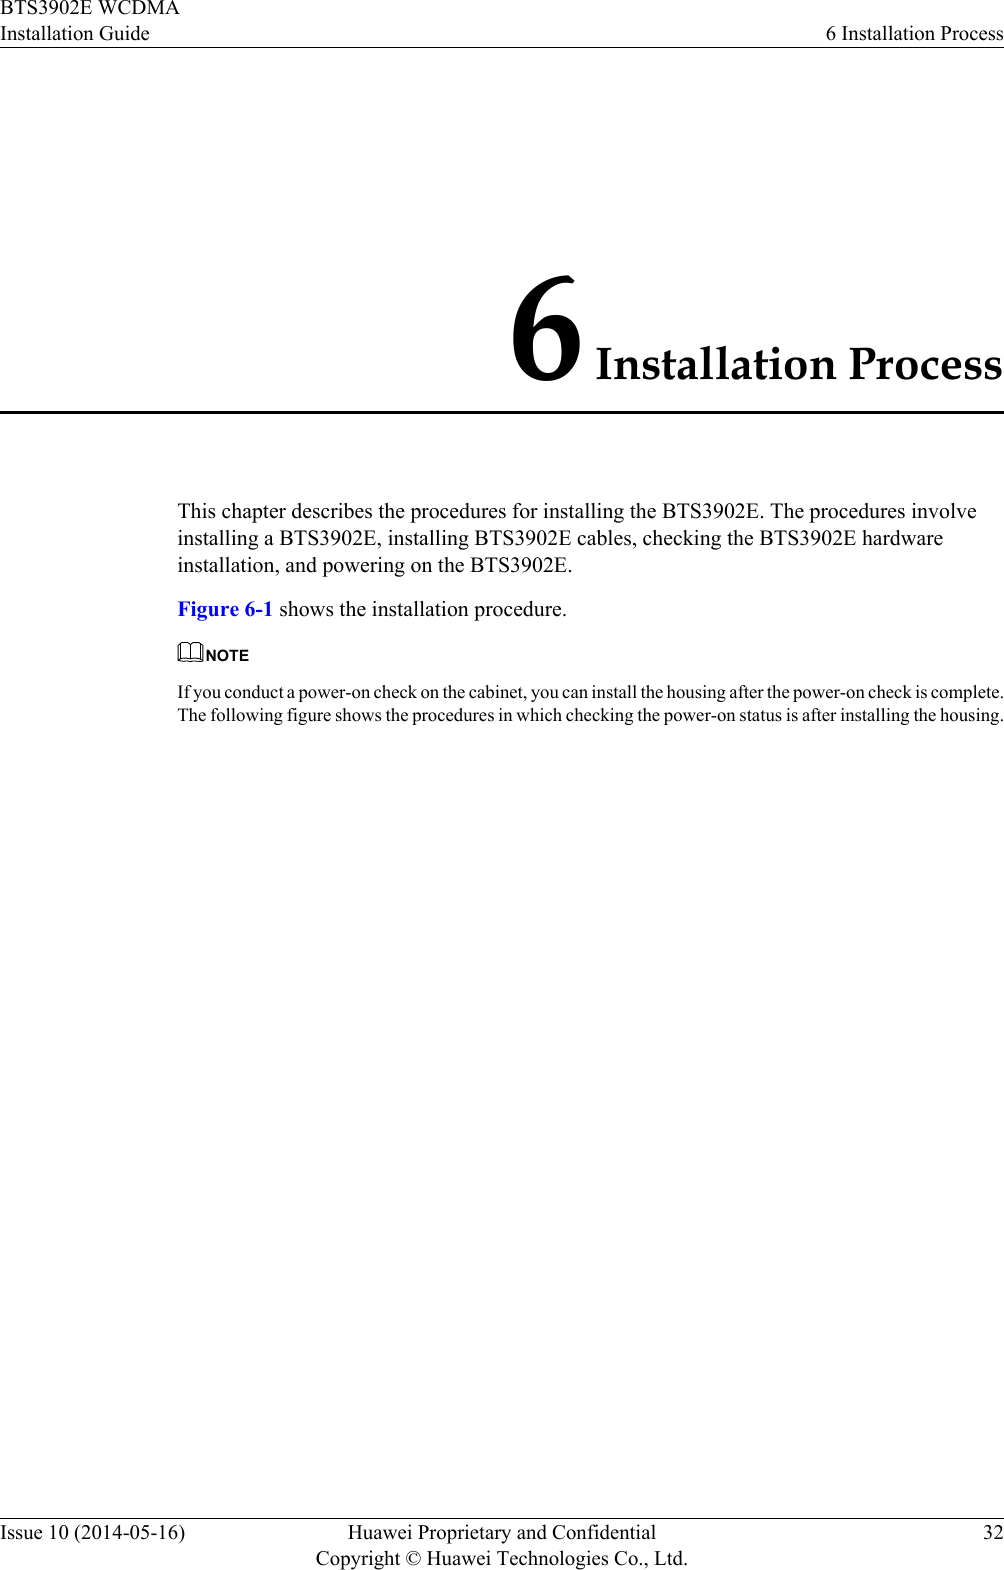 6 Installation ProcessThis chapter describes the procedures for installing the BTS3902E. The procedures involveinstalling a BTS3902E, installing BTS3902E cables, checking the BTS3902E hardwareinstallation, and powering on the BTS3902E.Figure 6-1 shows the installation procedure.NOTEIf you conduct a power-on check on the cabinet, you can install the housing after the power-on check is complete.The following figure shows the procedures in which checking the power-on status is after installing the housing.BTS3902E WCDMAInstallation Guide 6 Installation ProcessIssue 10 (2014-05-16) Huawei Proprietary and ConfidentialCopyright © Huawei Technologies Co., Ltd.32